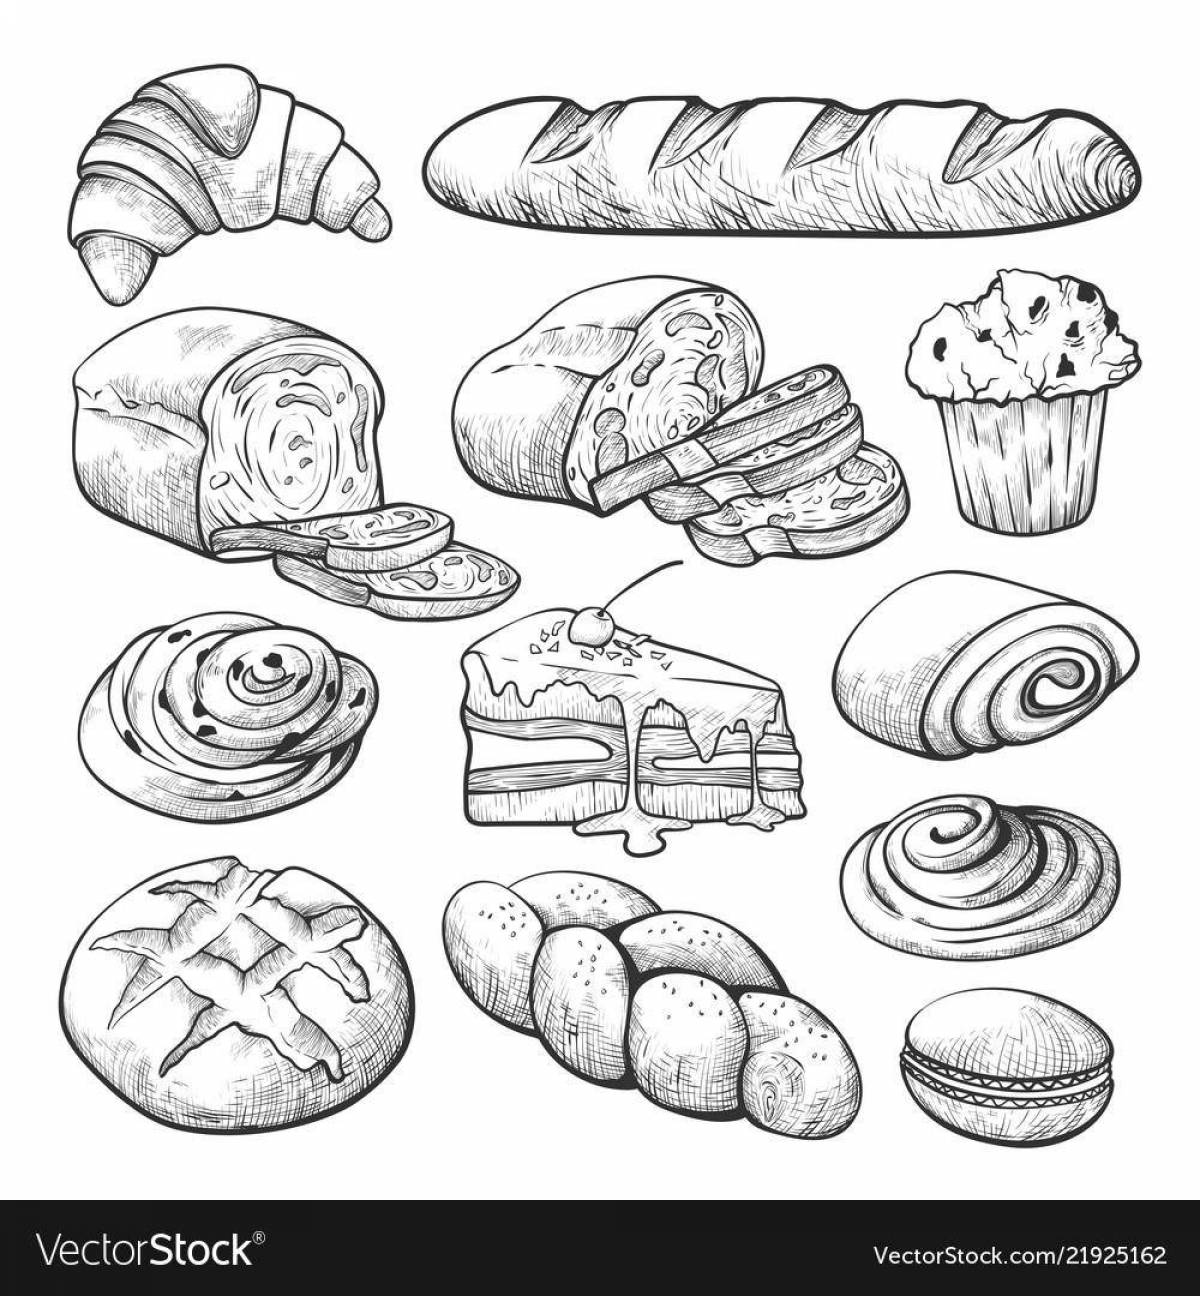 Nutritious baked goods coloring page